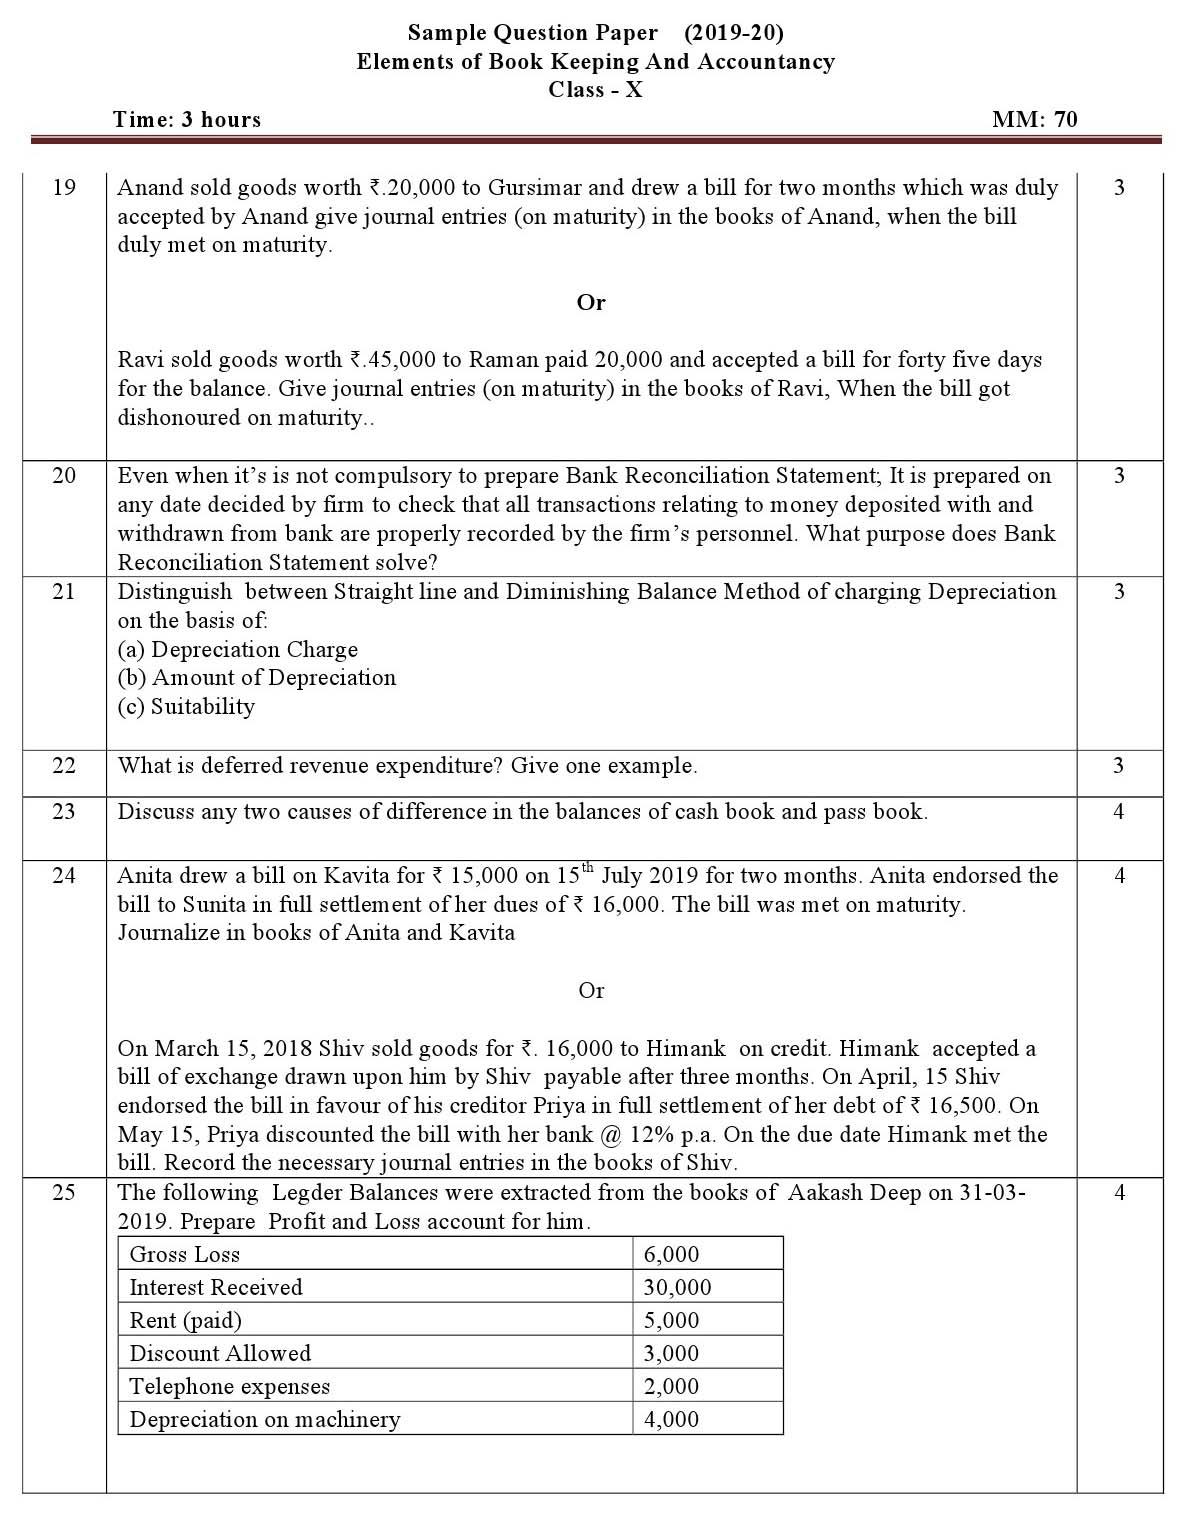 Elements of Book Keeping And Accountancy CBSE Class X Sample Question Paper 2019 20 - Image 3